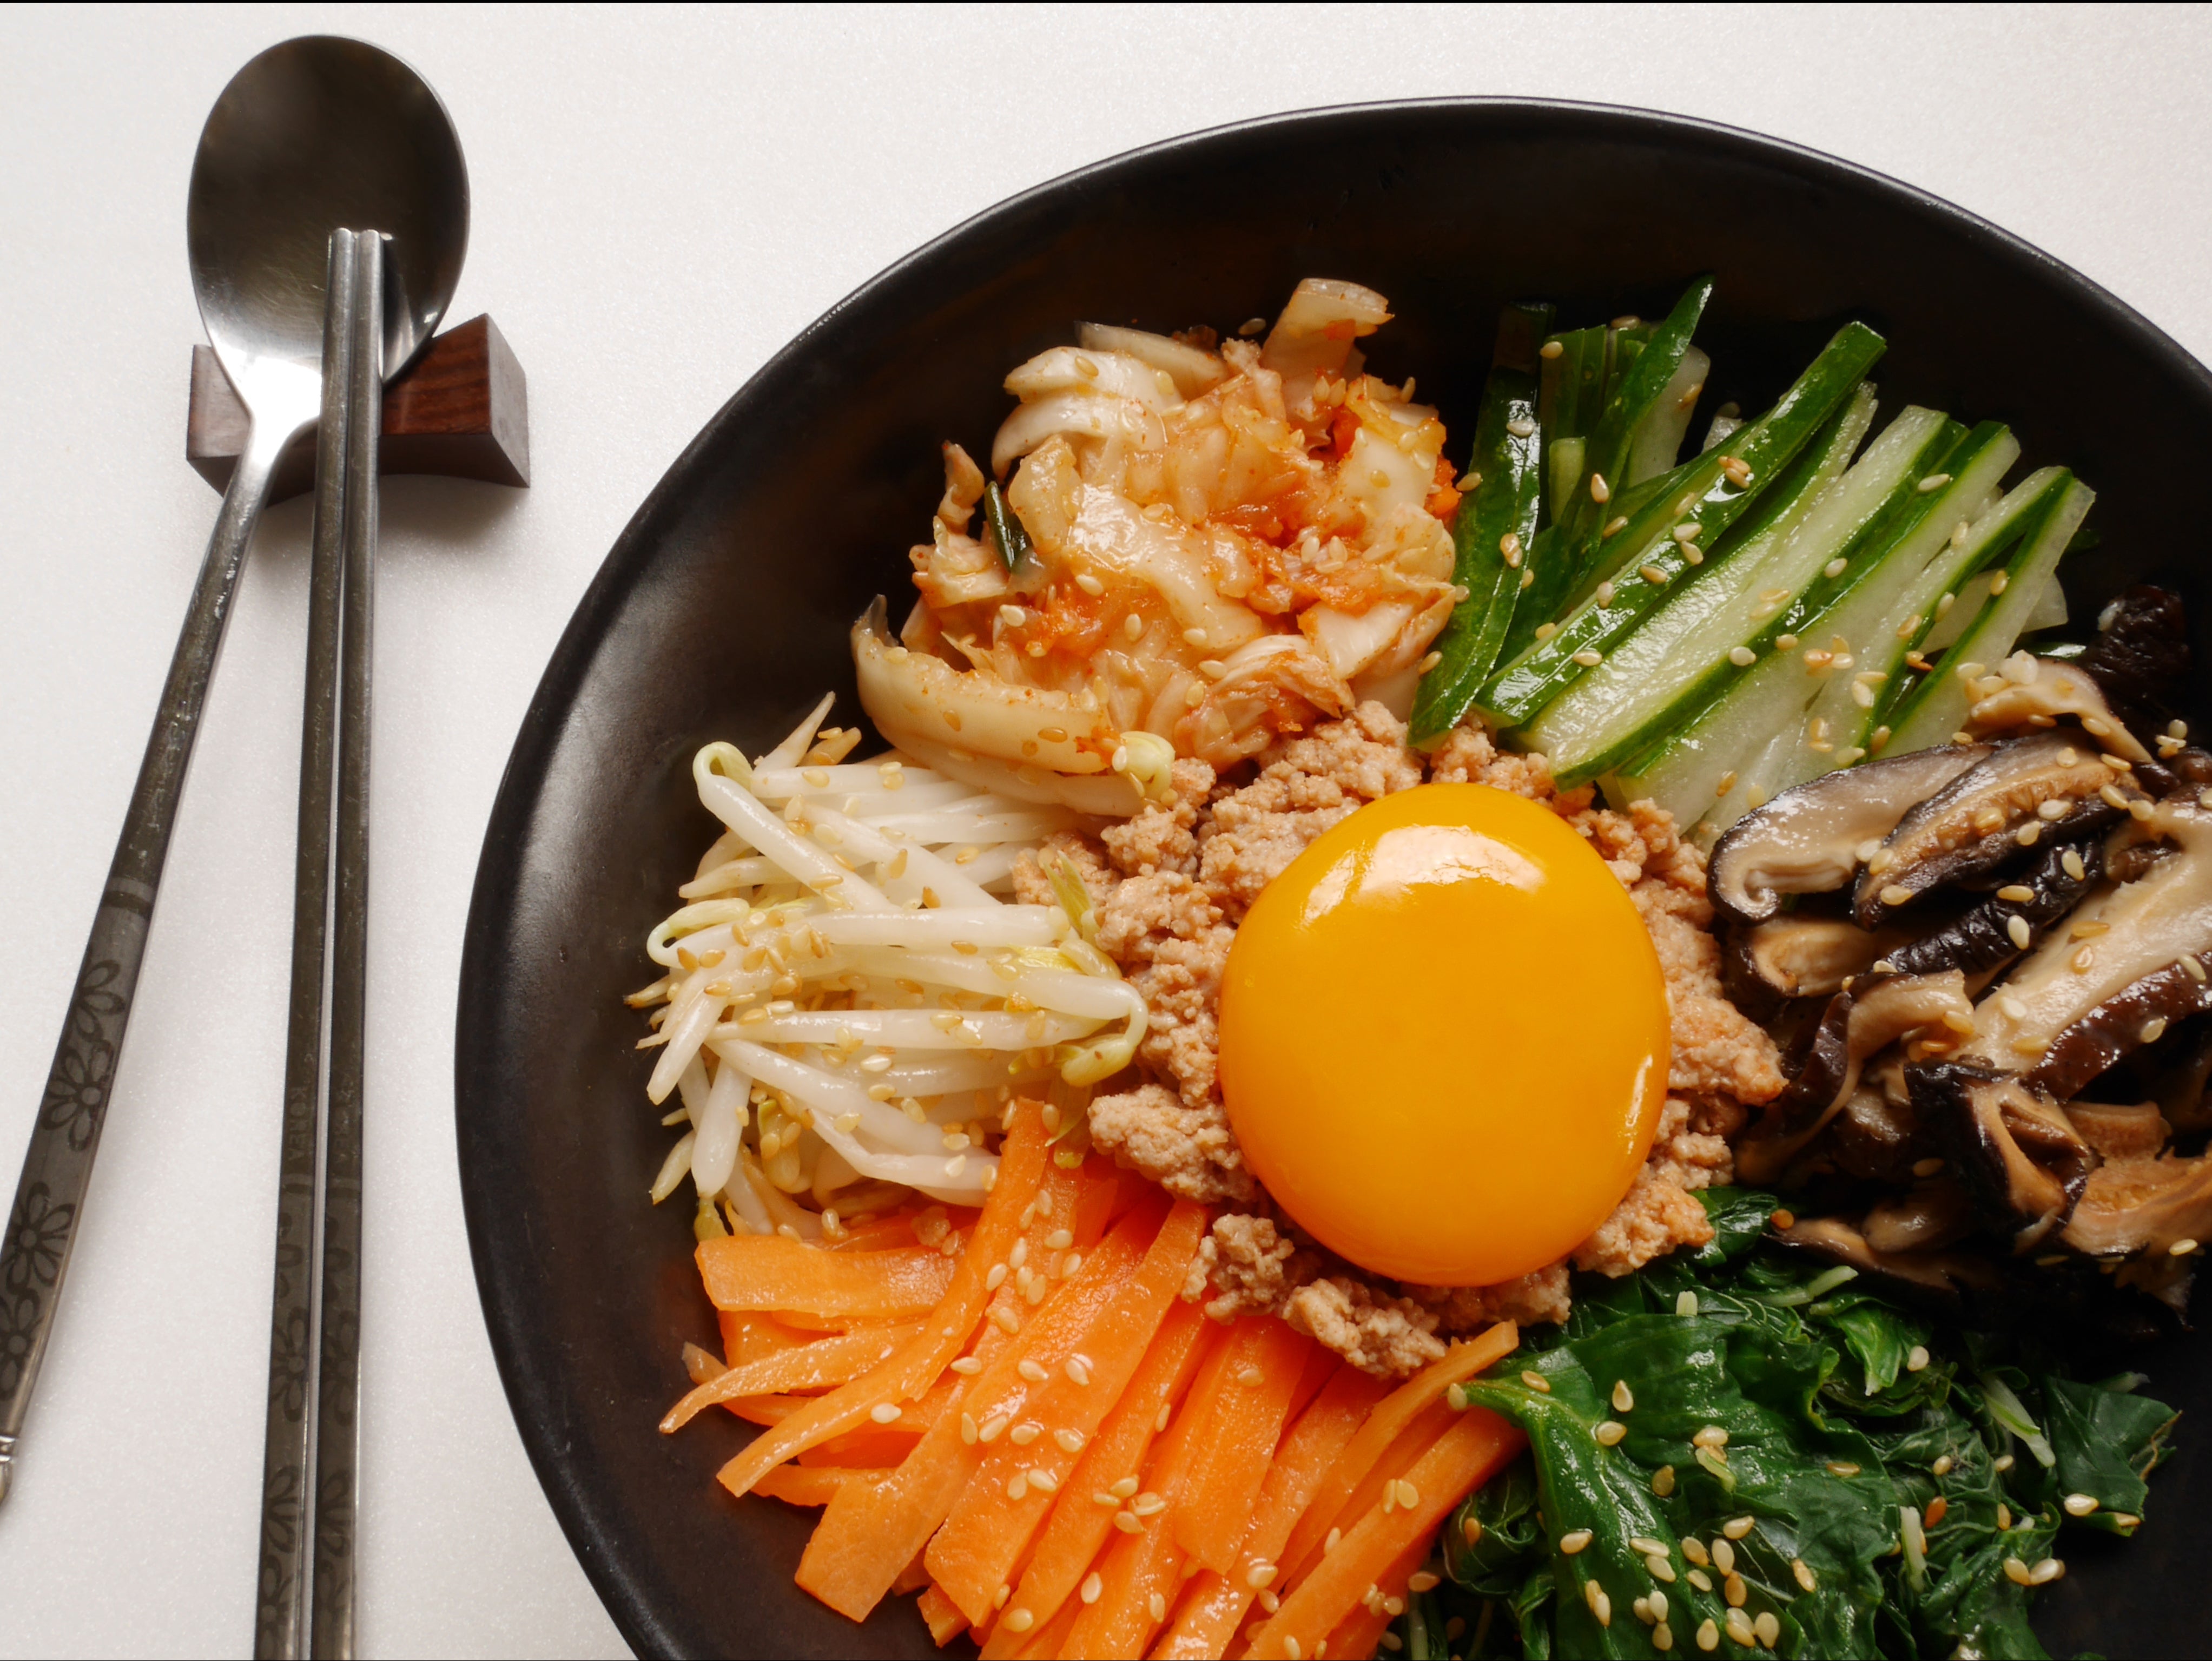 Bibimbap is one of the most popular and well known Korean dishes